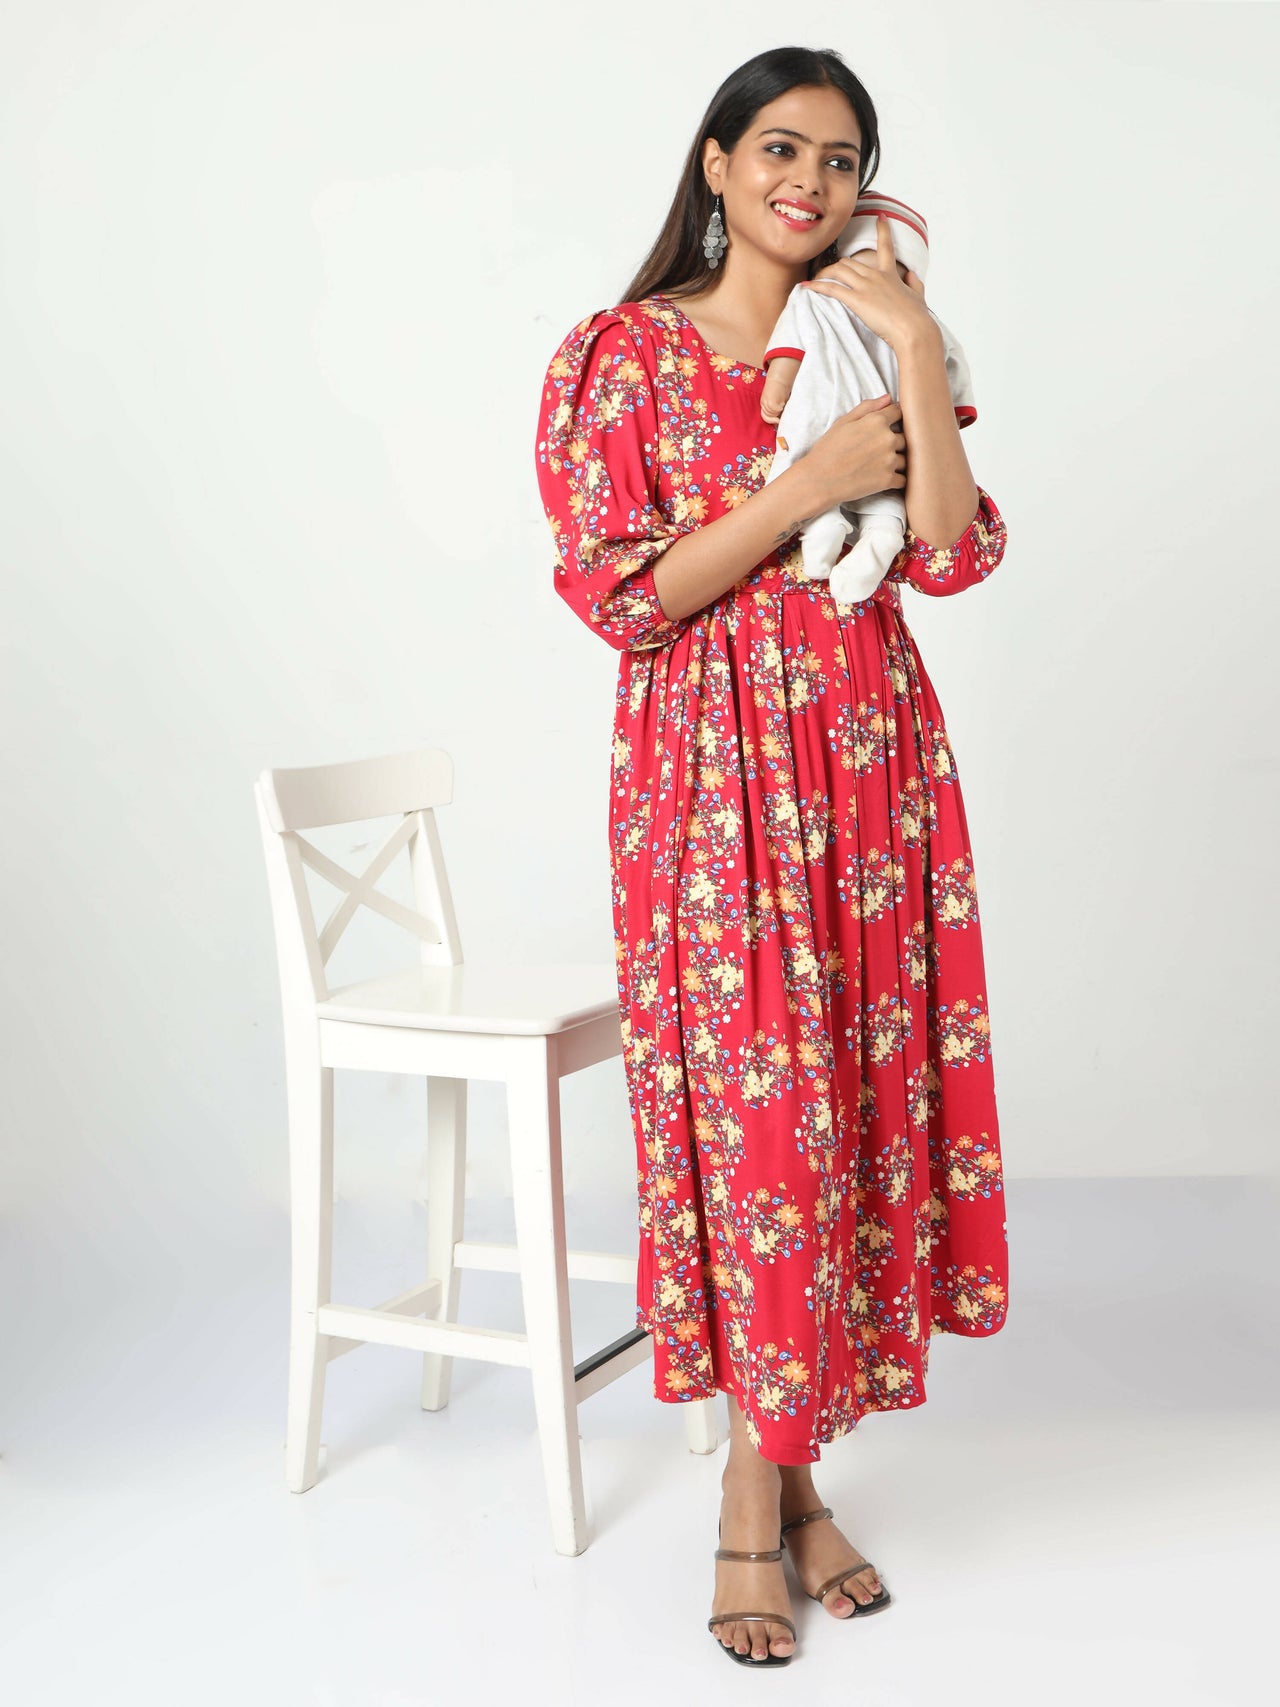 Manet Three Fourth Maternity Dress Floral Print With Concealed Zipper Nursing Access - Red - Distacart